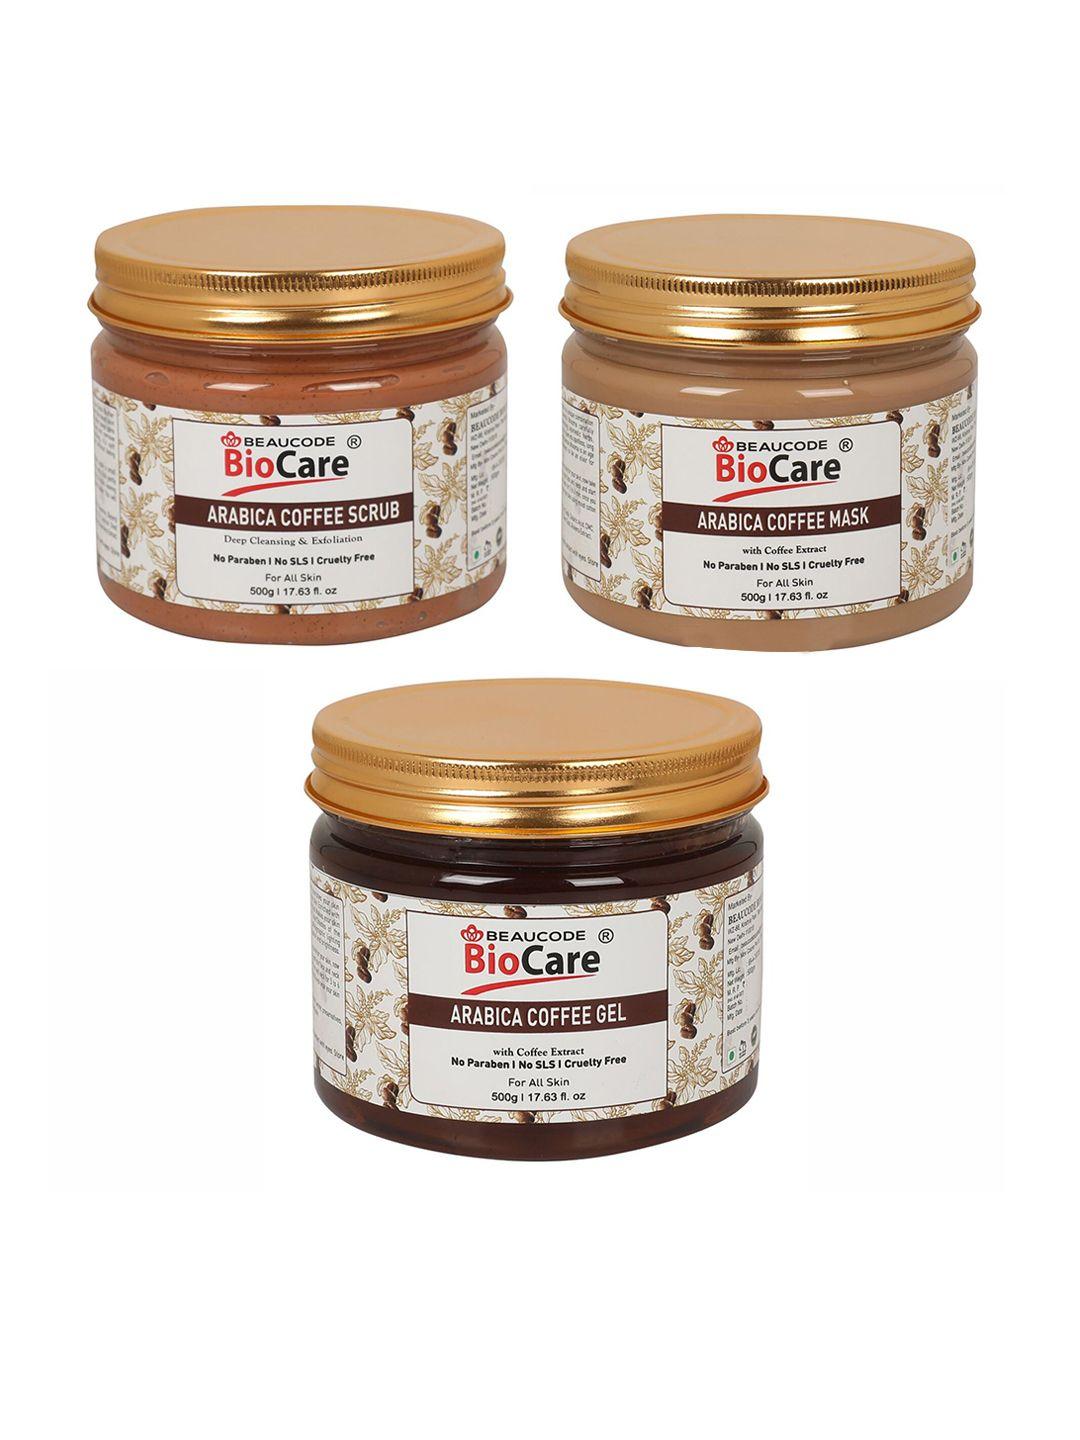 beaucode biocare arabica coffee facial kit for all skin types - 1500 g